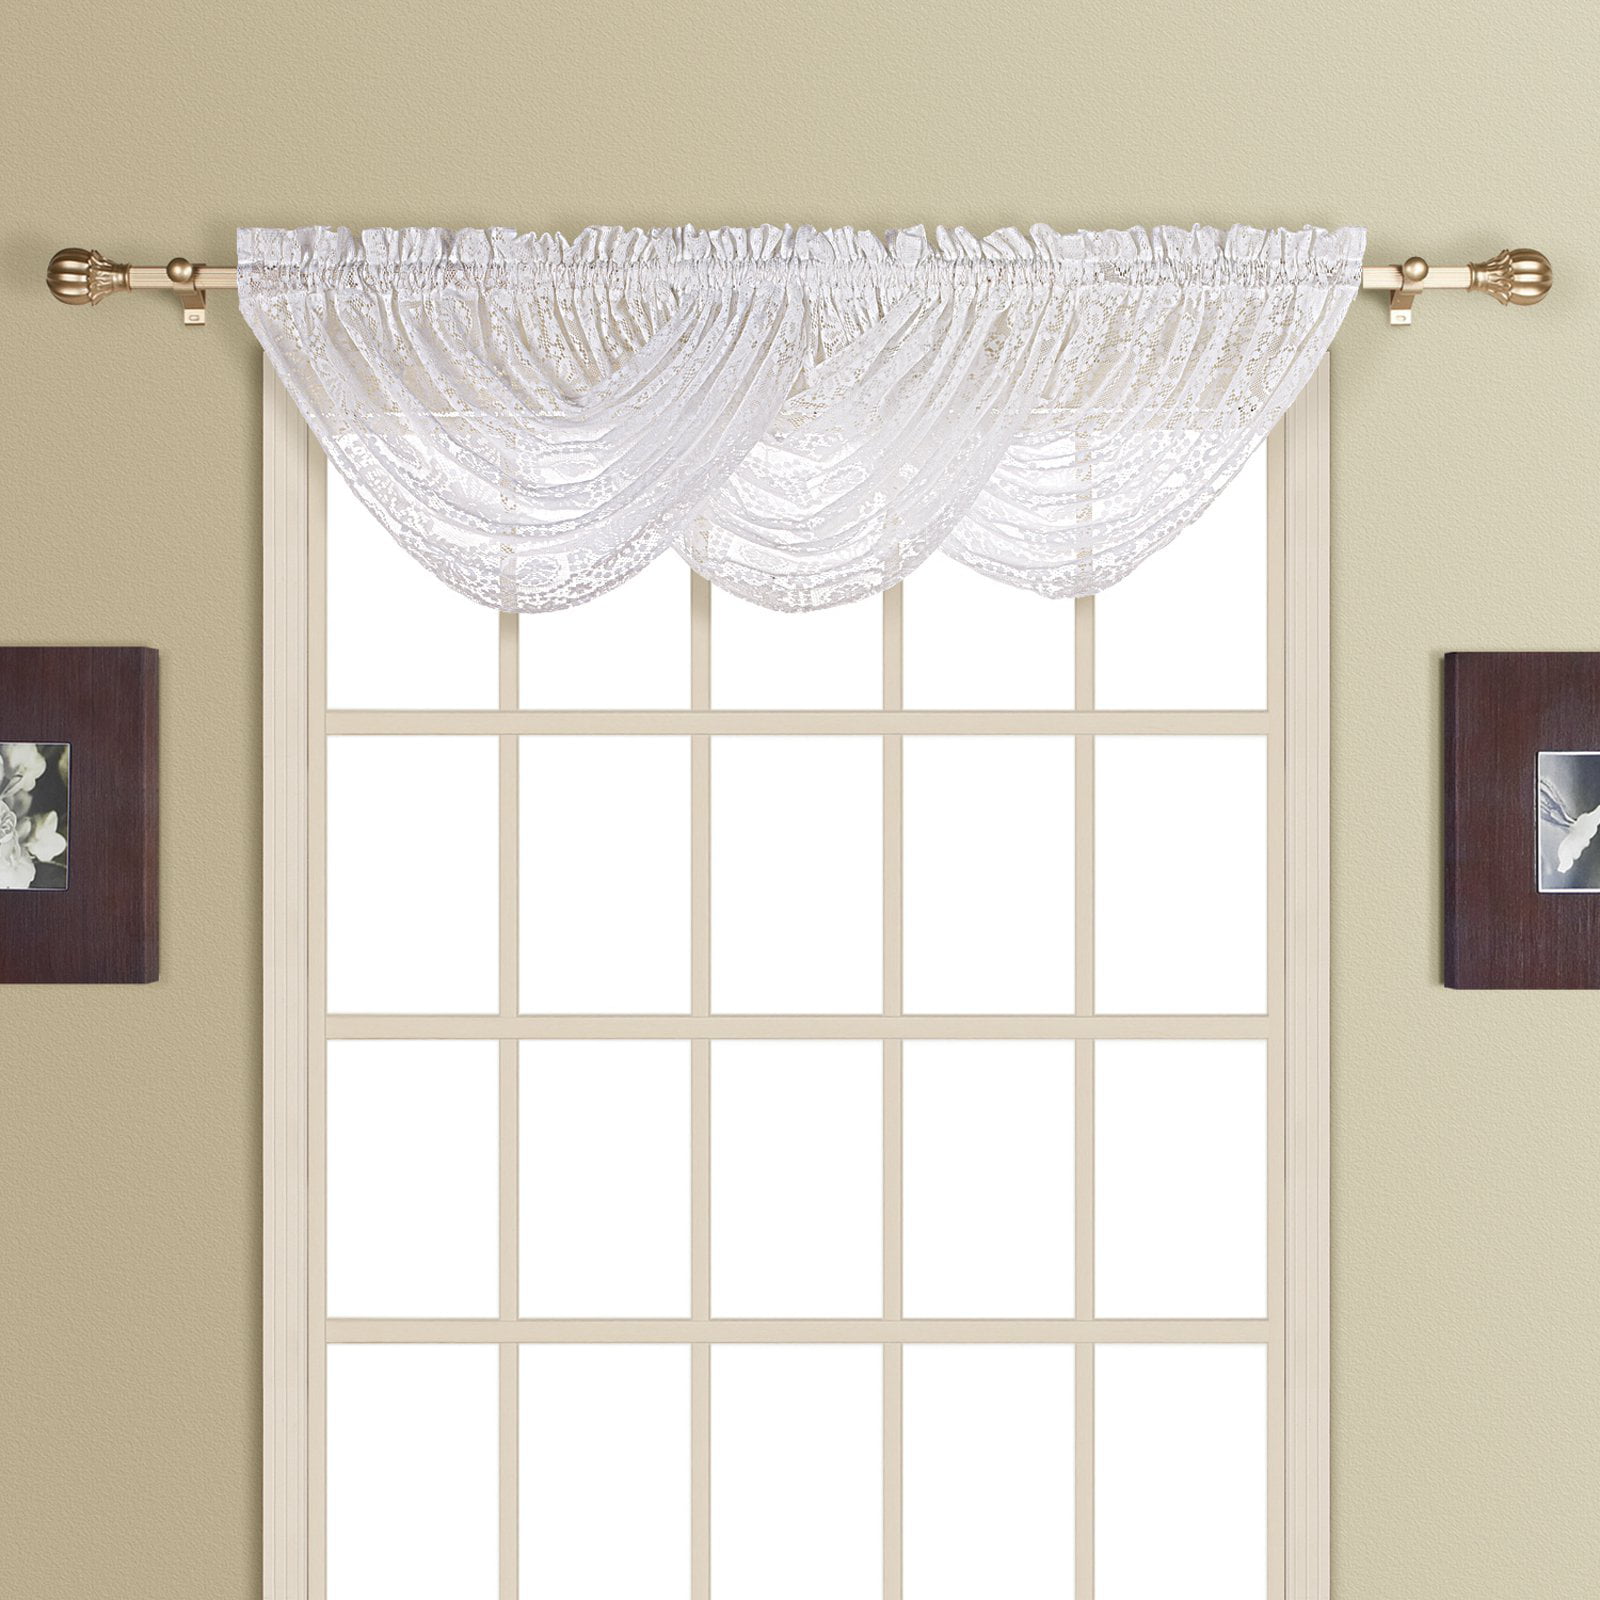 56 by 38-Inch United Curtain New Rochelle Lace Swags Set of 2 White